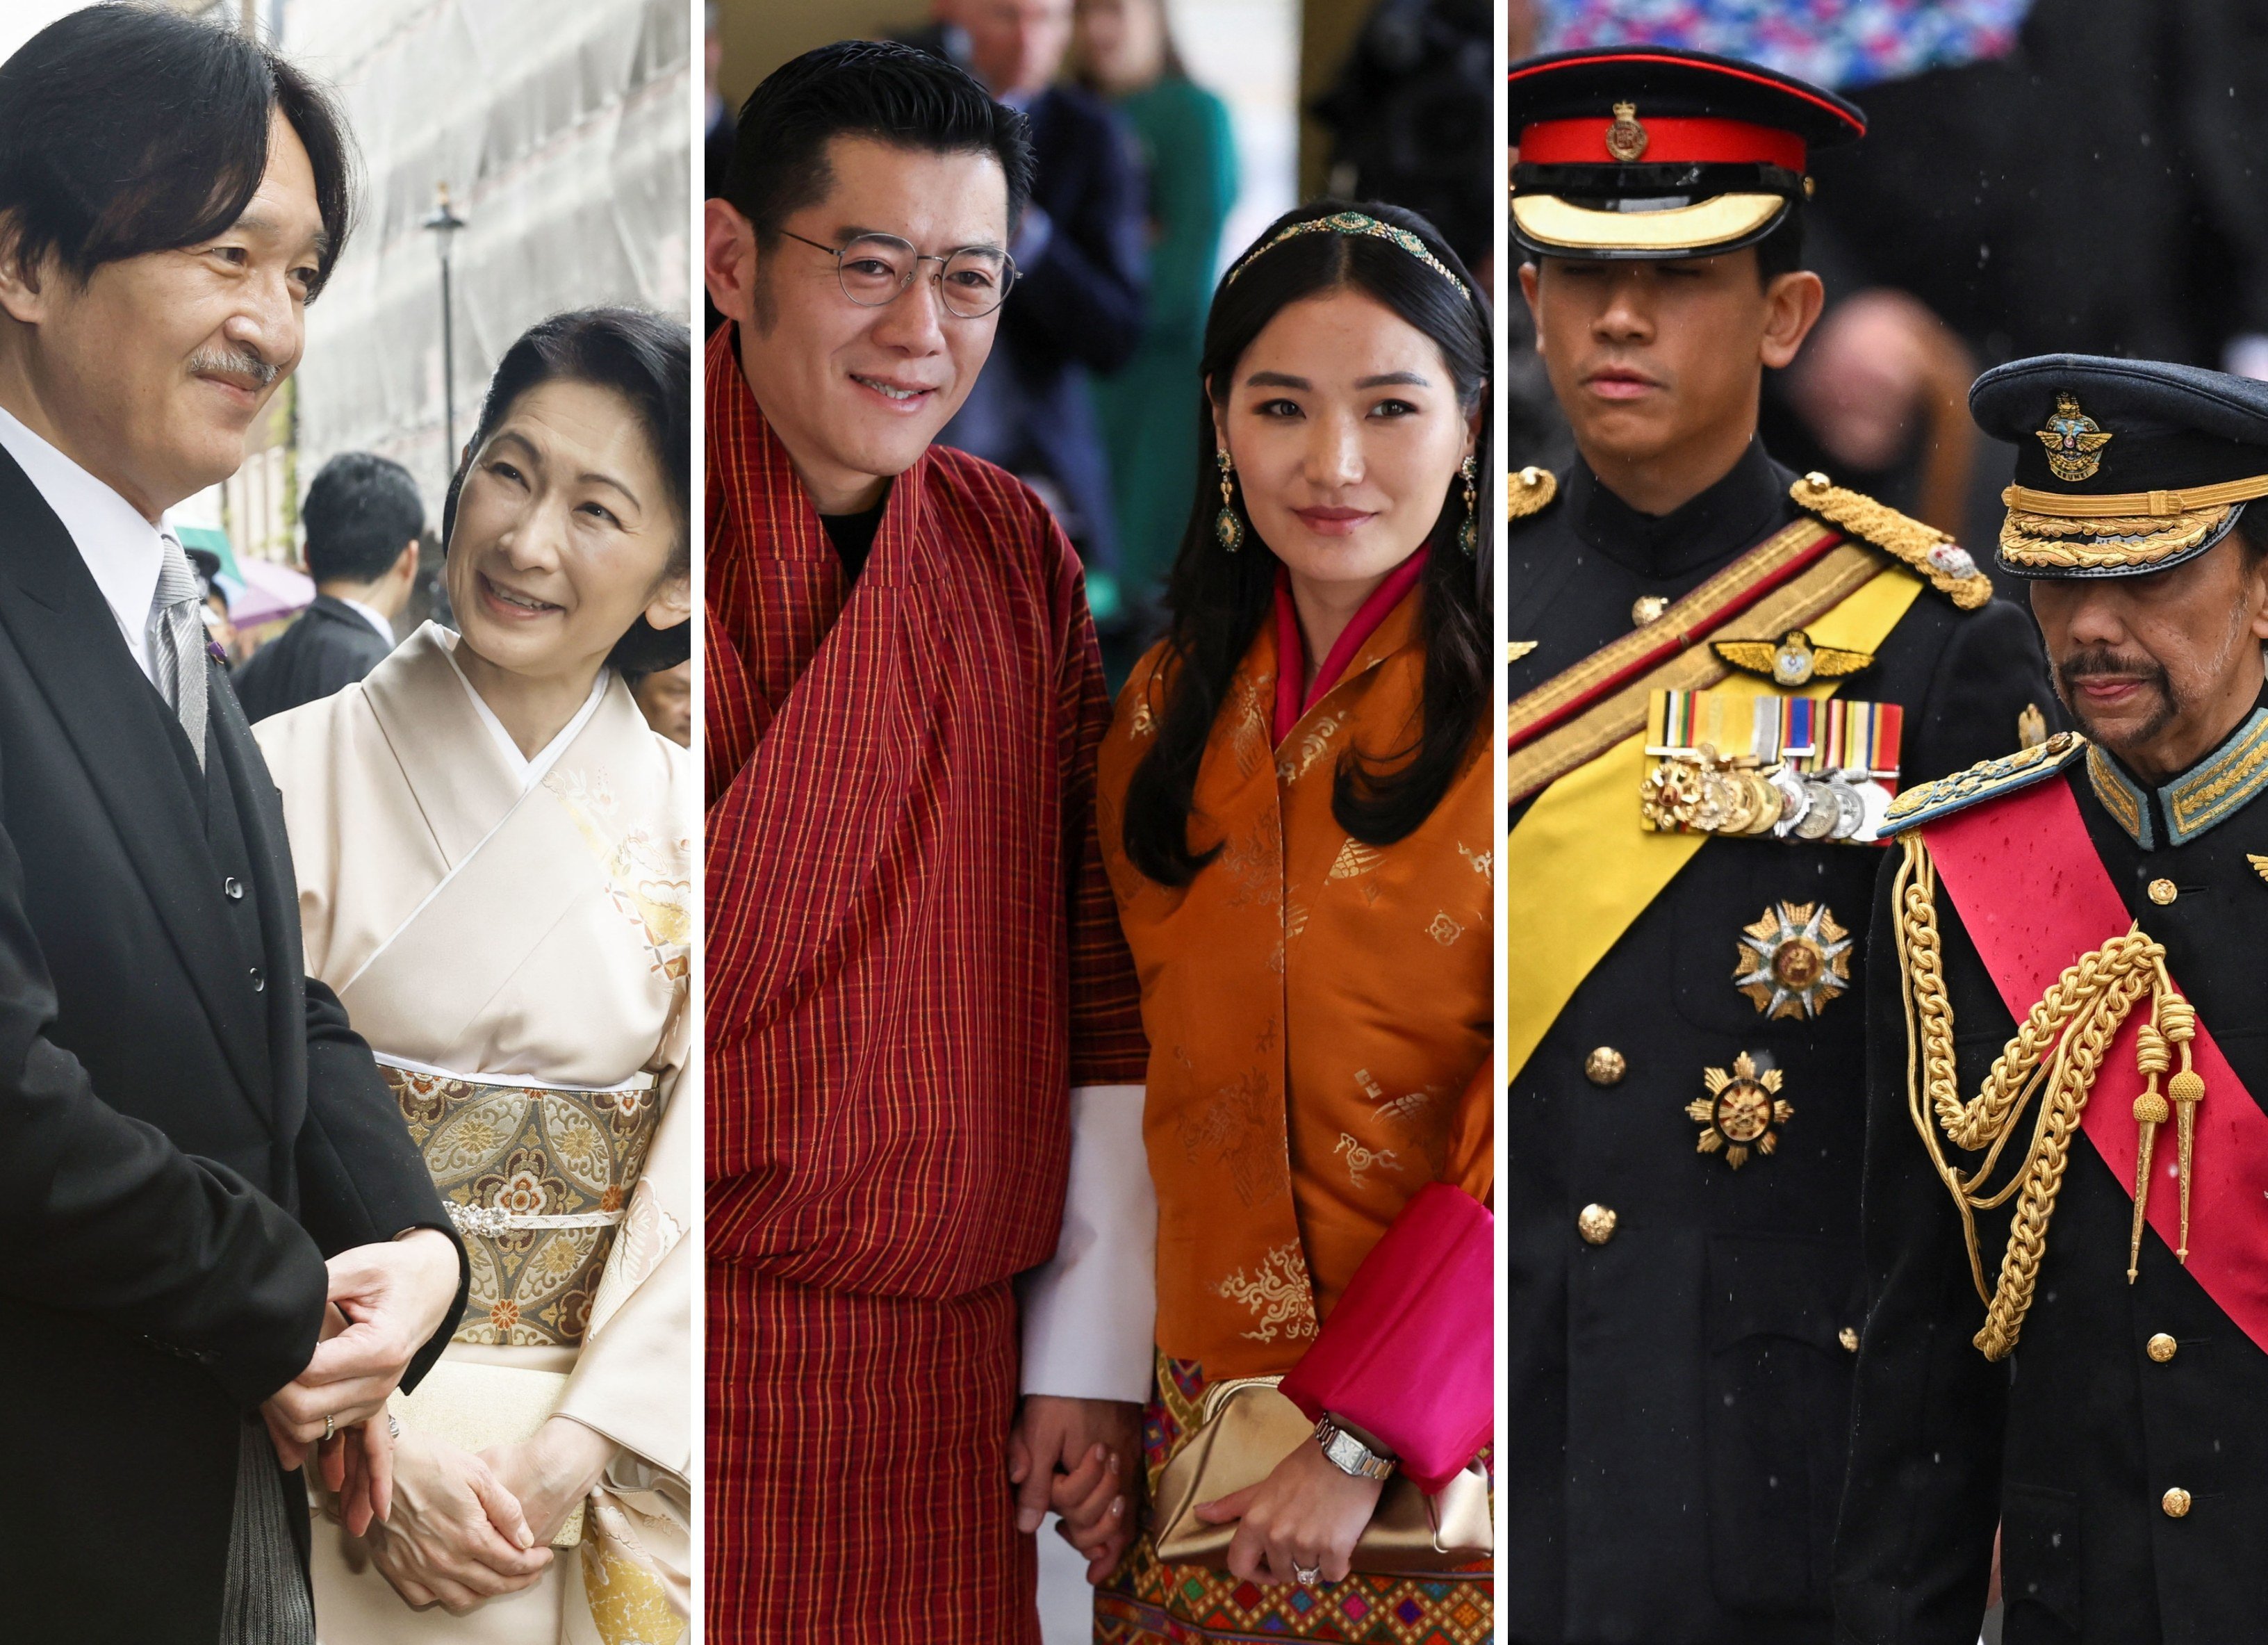 Crown Prince Akishino of Japan and Crown Princess Kiko; Bhutan’s King Jigme Khesar Namgyel Wangchuck and Queen Jetsun Pema; and Brunei’s head of state, Sultan Hassanal Bolkiah and Prince Abdul Mateen arrive at the coronation of King Charles and Queen Consort Camilla in London, Britain, on May 6. Photos: Kyodo, Reuters